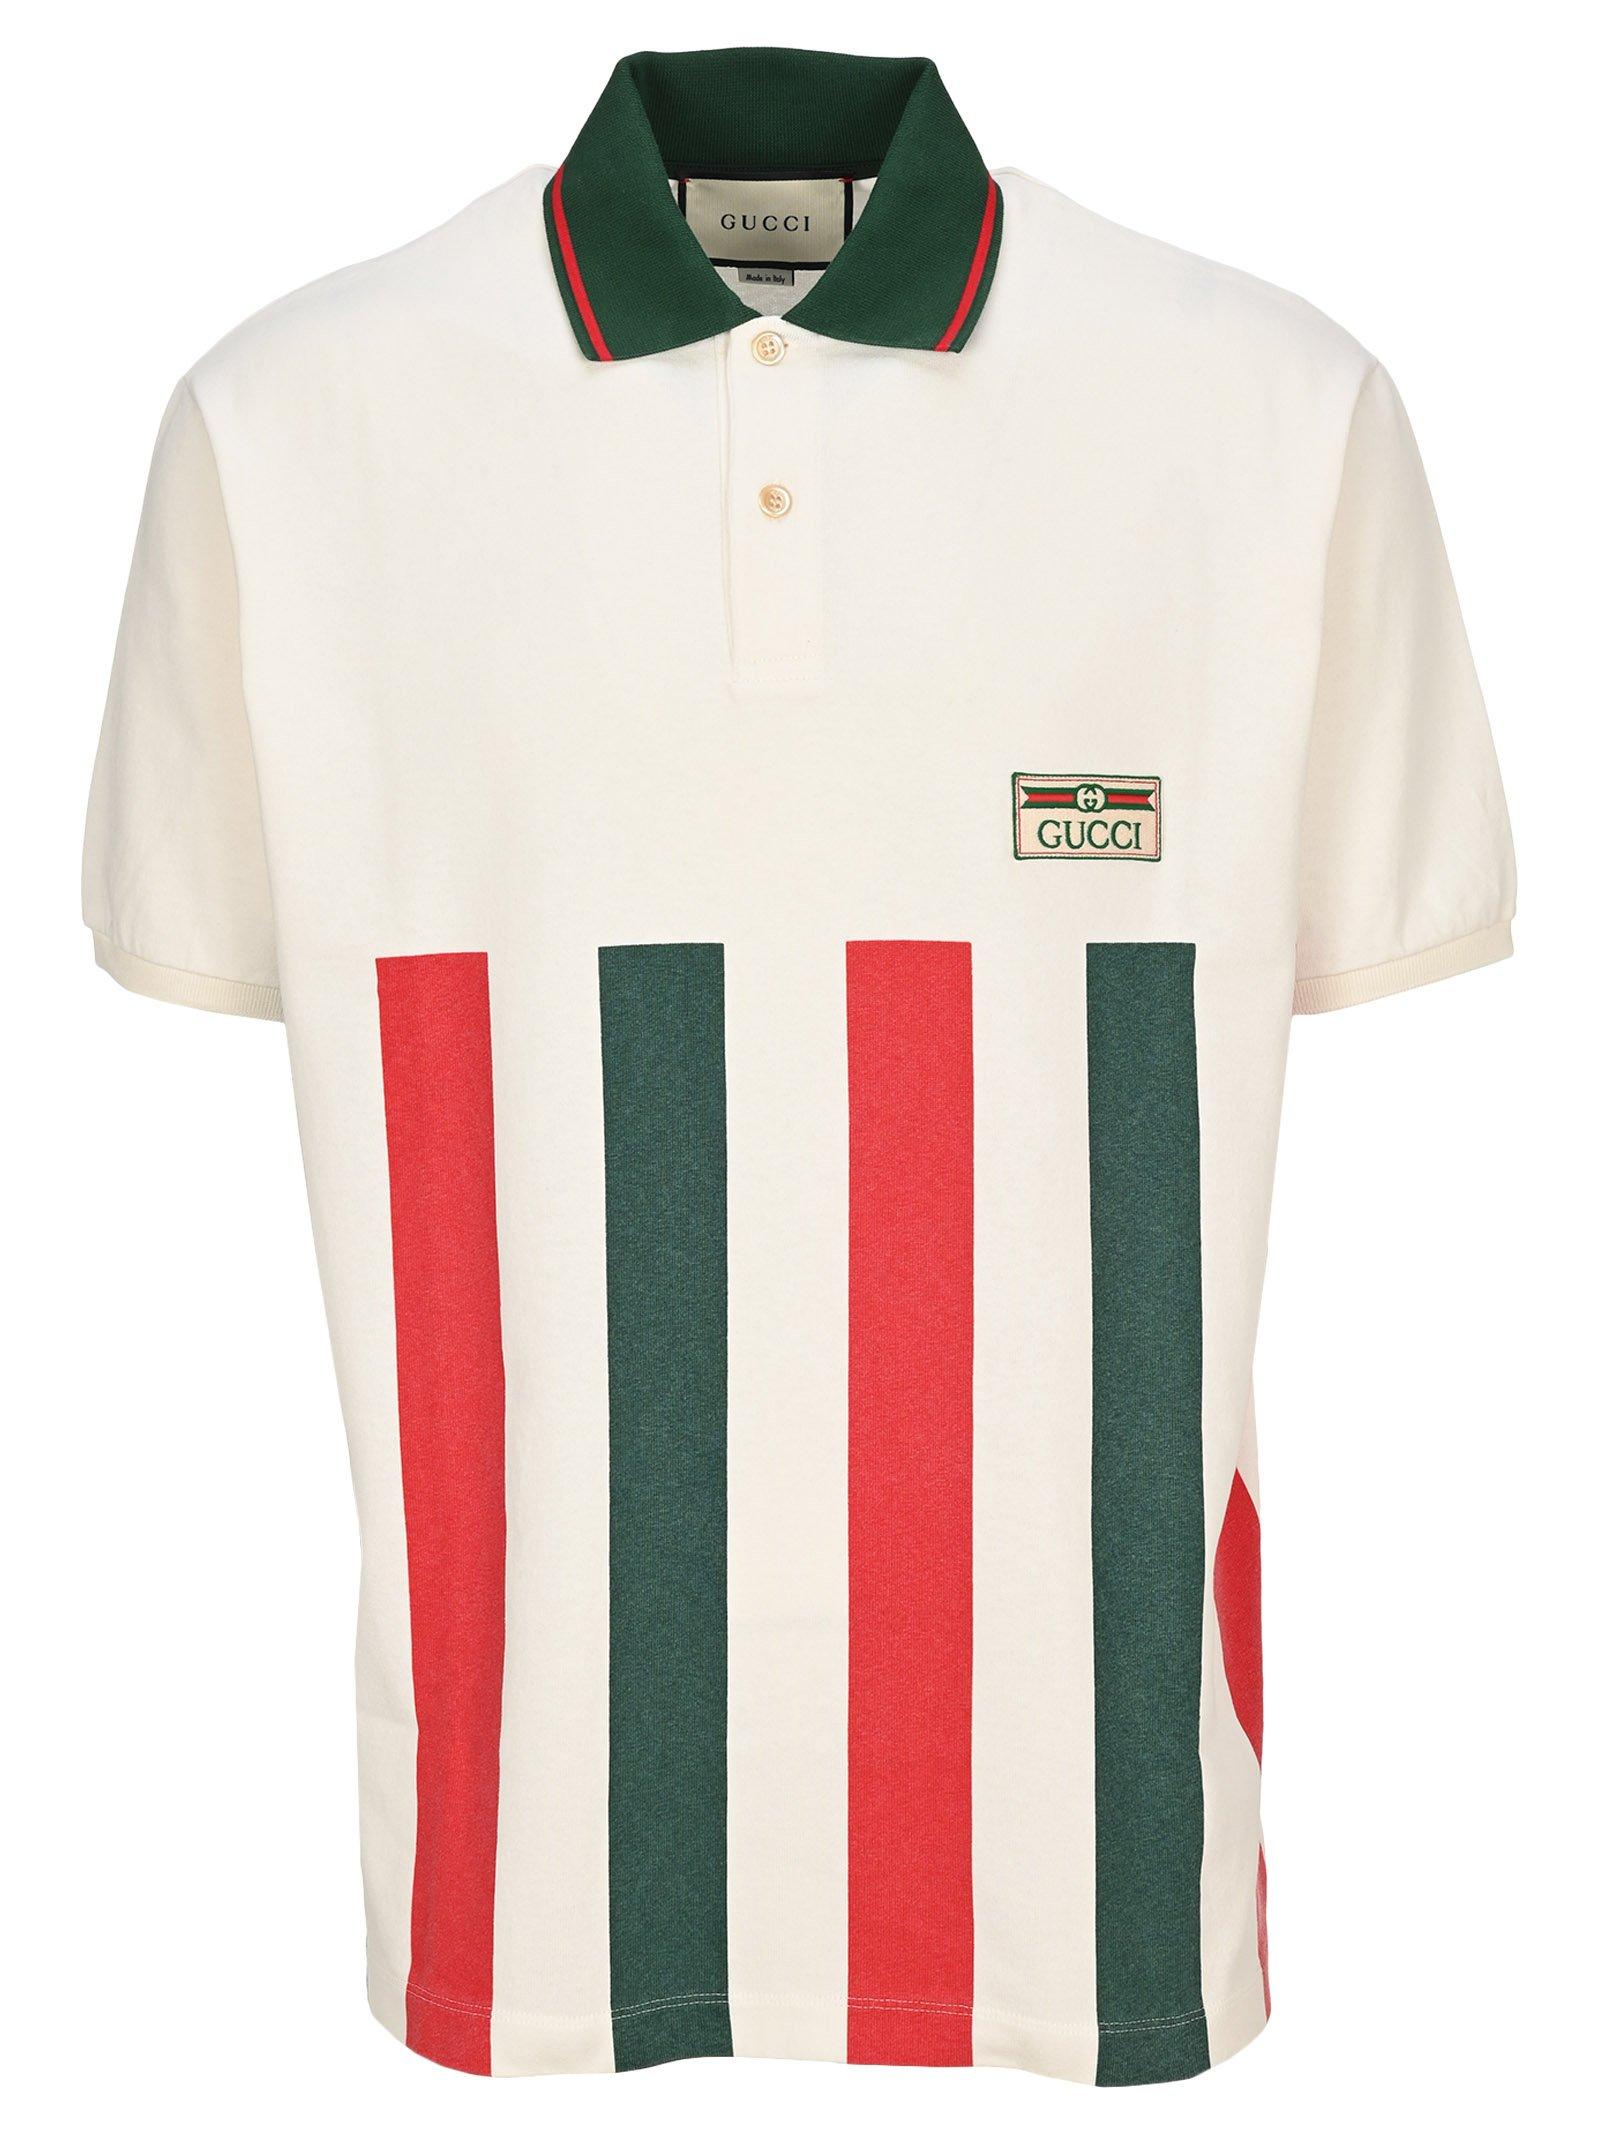 Gucci Striped Logo Polo in White Green Red (White) for Men - Save 38% ...